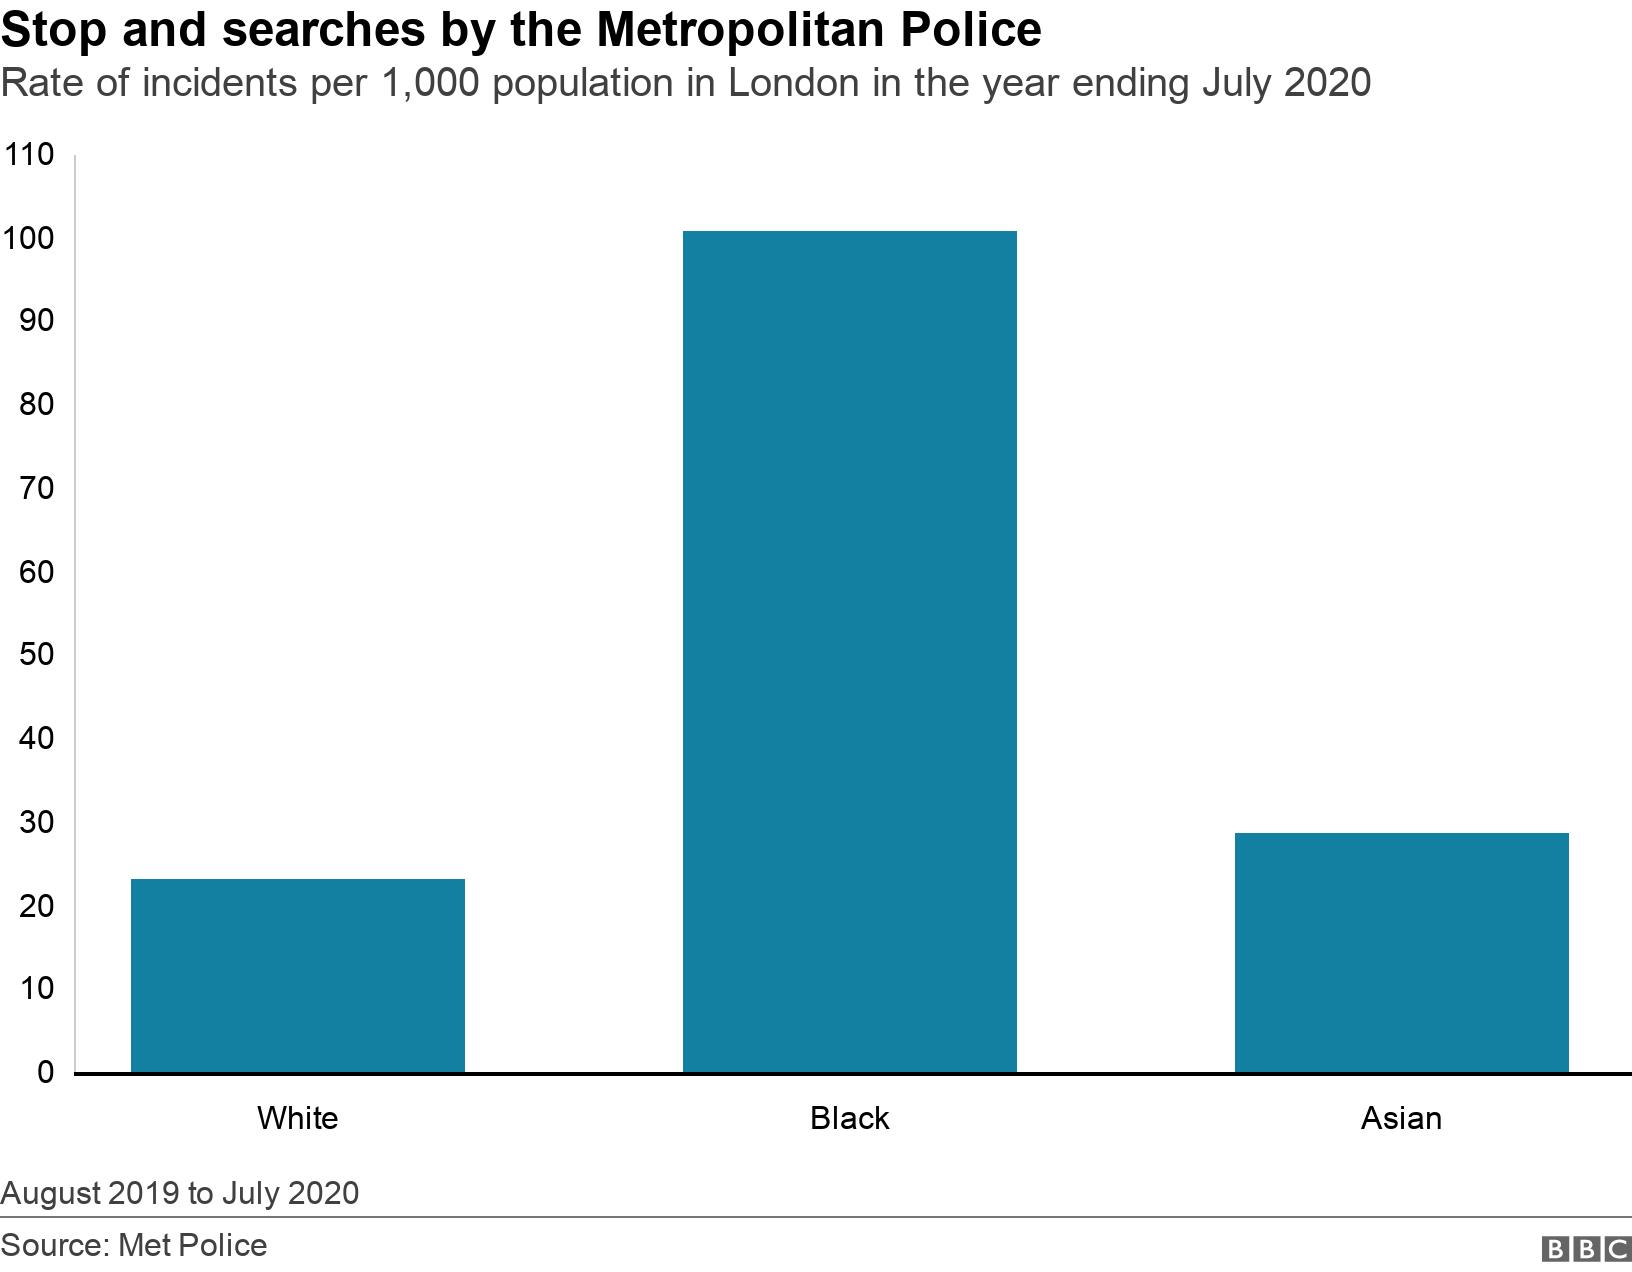 Stop and searches by the Metropolitan Police  . Rate of incidents per 1,000 population in London in the year ending July 2020. Rate of stop and serach per 100,000
White= 2322.626889
Black= 10092.85127
Asian= 2868.147346 August 2019 to July 2020.